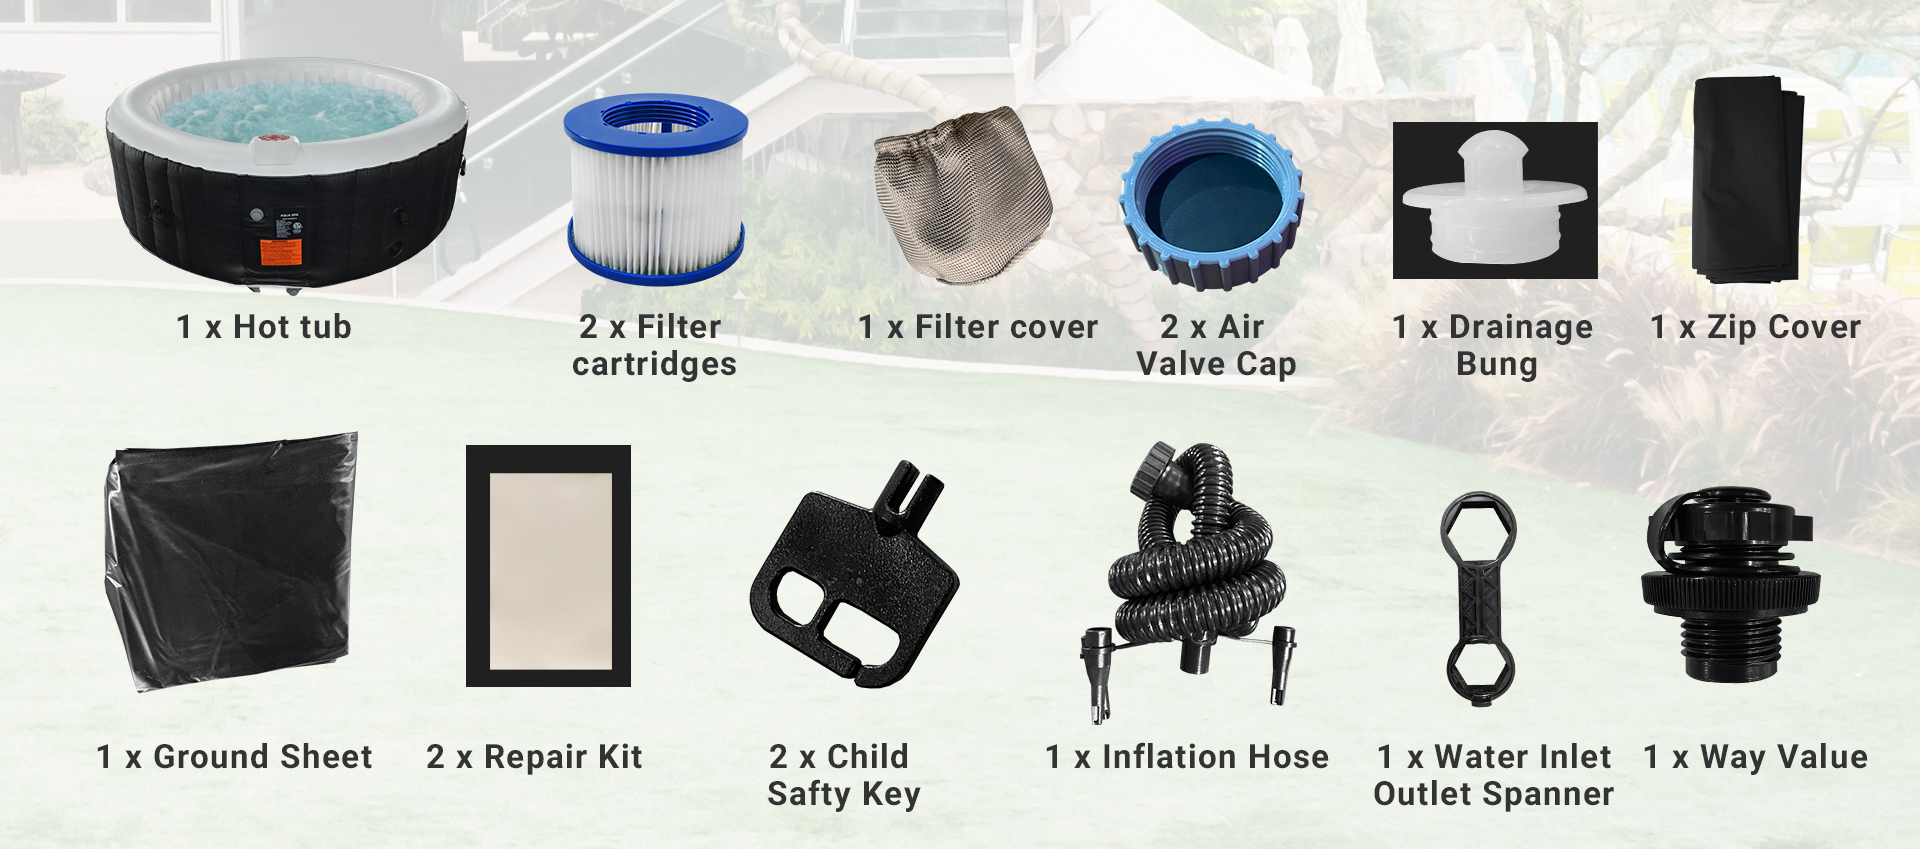 This blow up hot tub comes with 2 filter cartridges, 1 filter cover, 2 air valve caps, 1 drainage bung, 1 zip cover, 1 ground sheet, 2 repair kits, 2 child safety keys, 1 inflation hose, 1 water inlet outlet spanner, and a 1 way valve